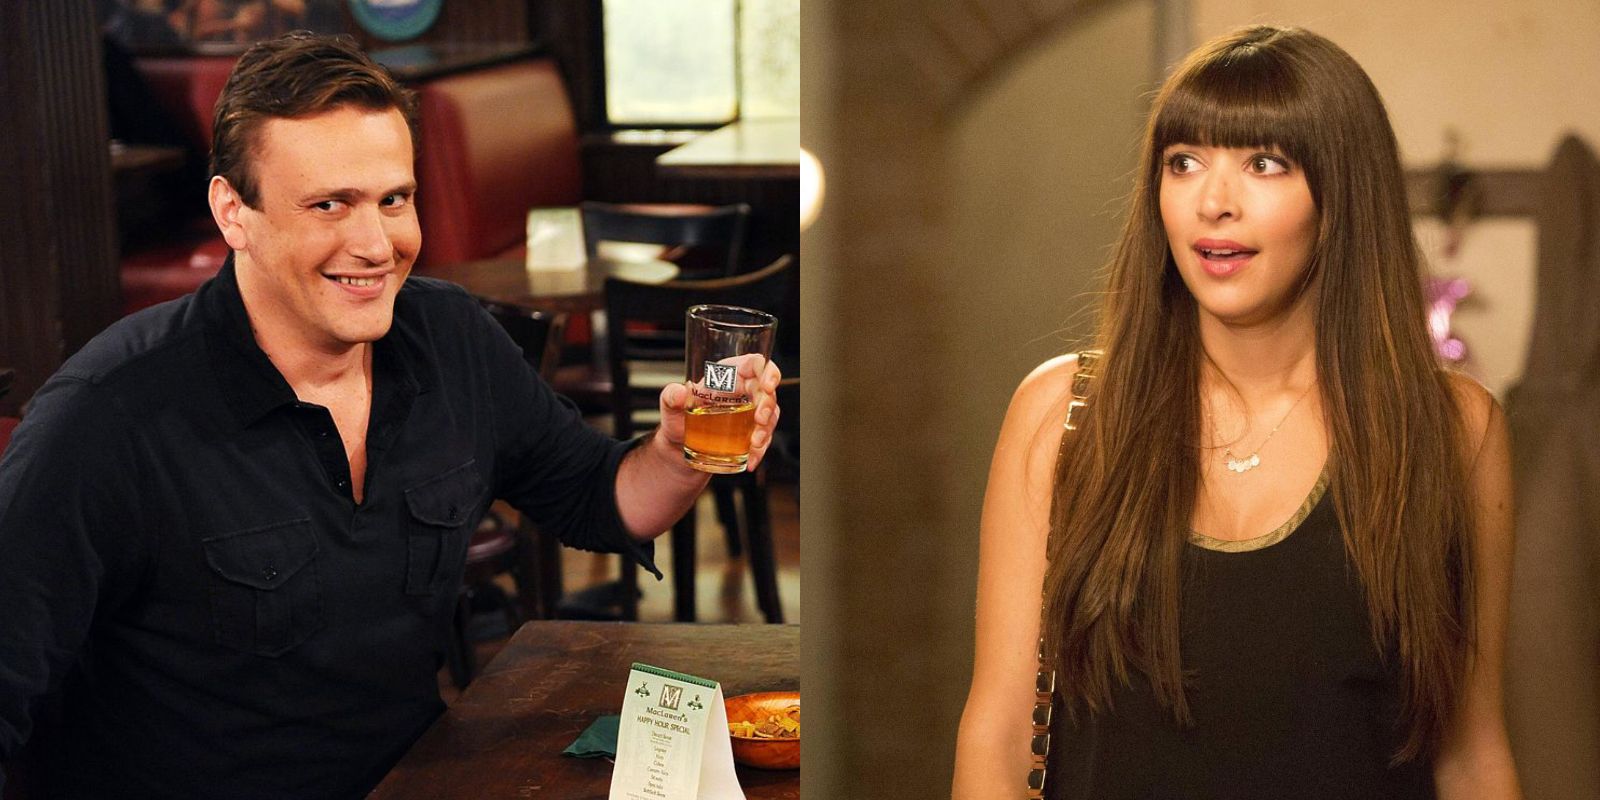 Marshall in How I Met Your Mother and Cece in New Girl.